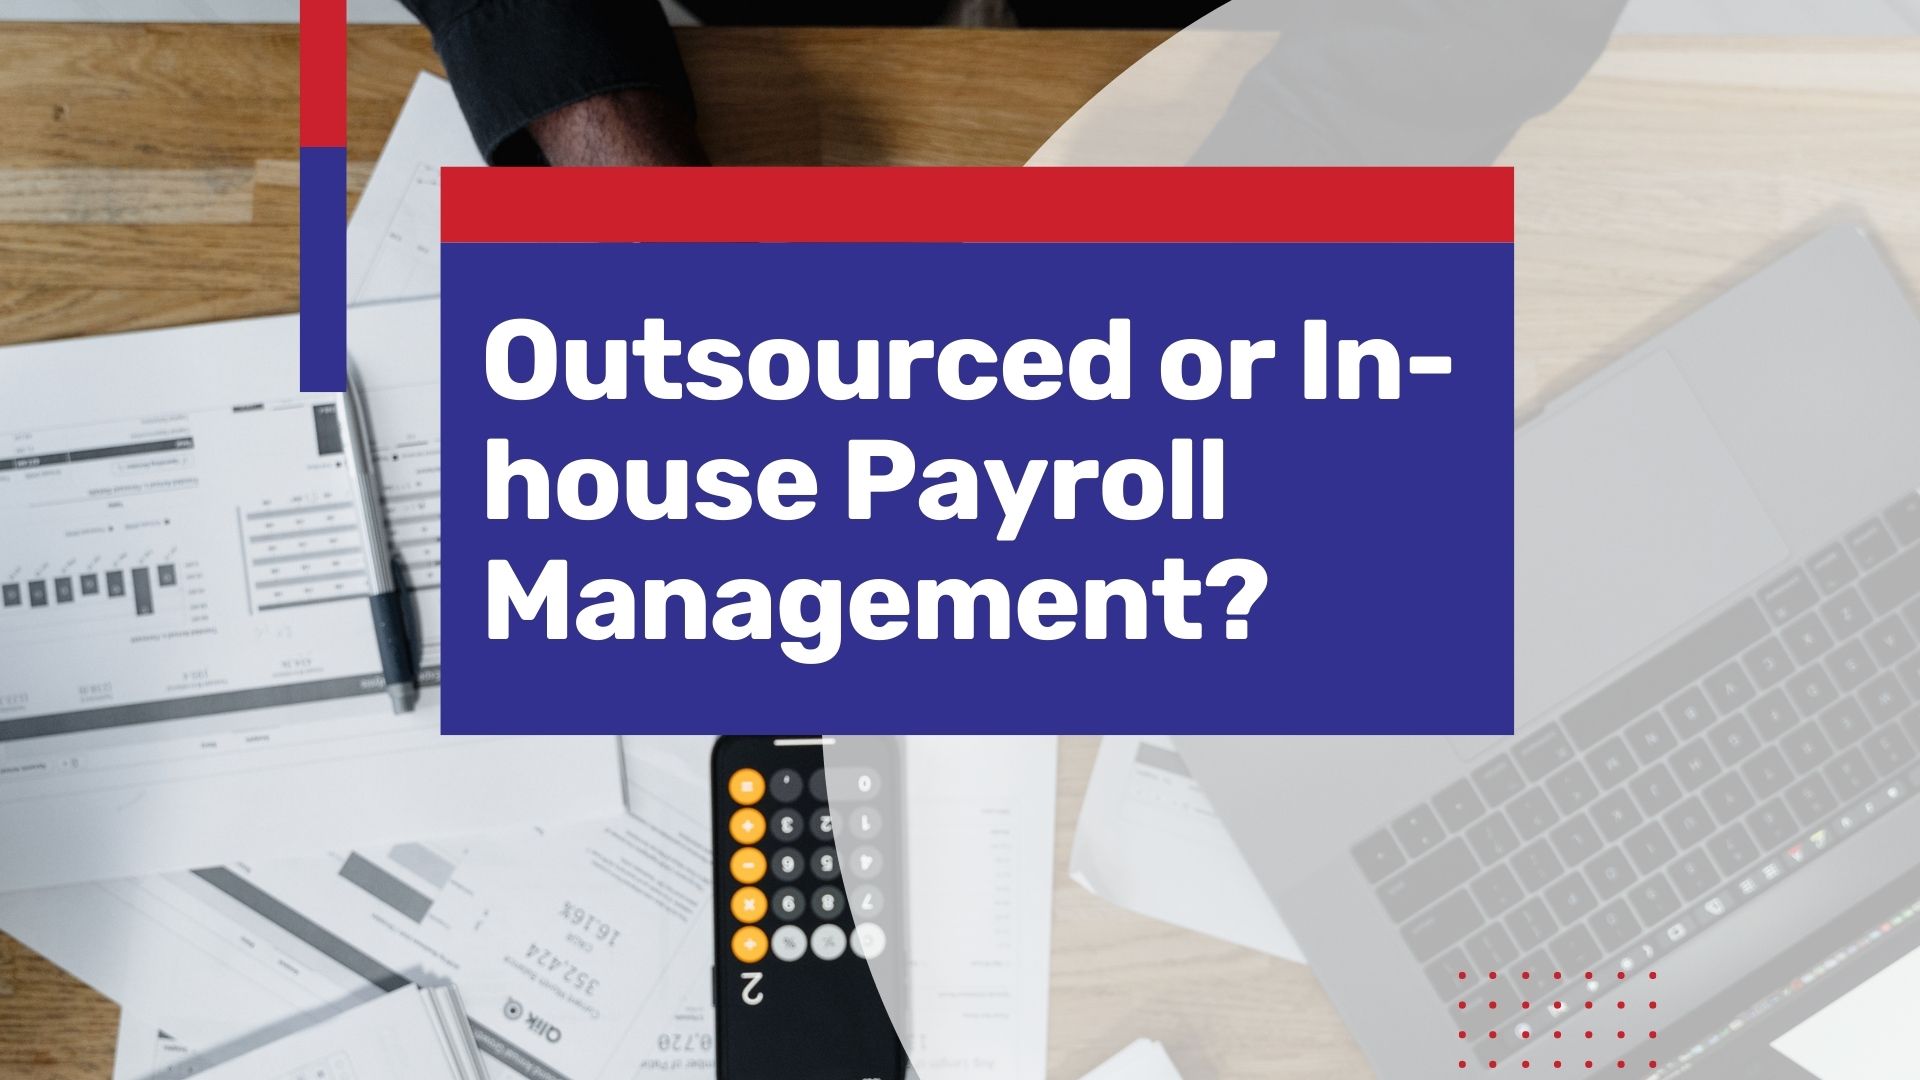 Considering Outsourced and In-house Payroll Management when expanding to Vietnam